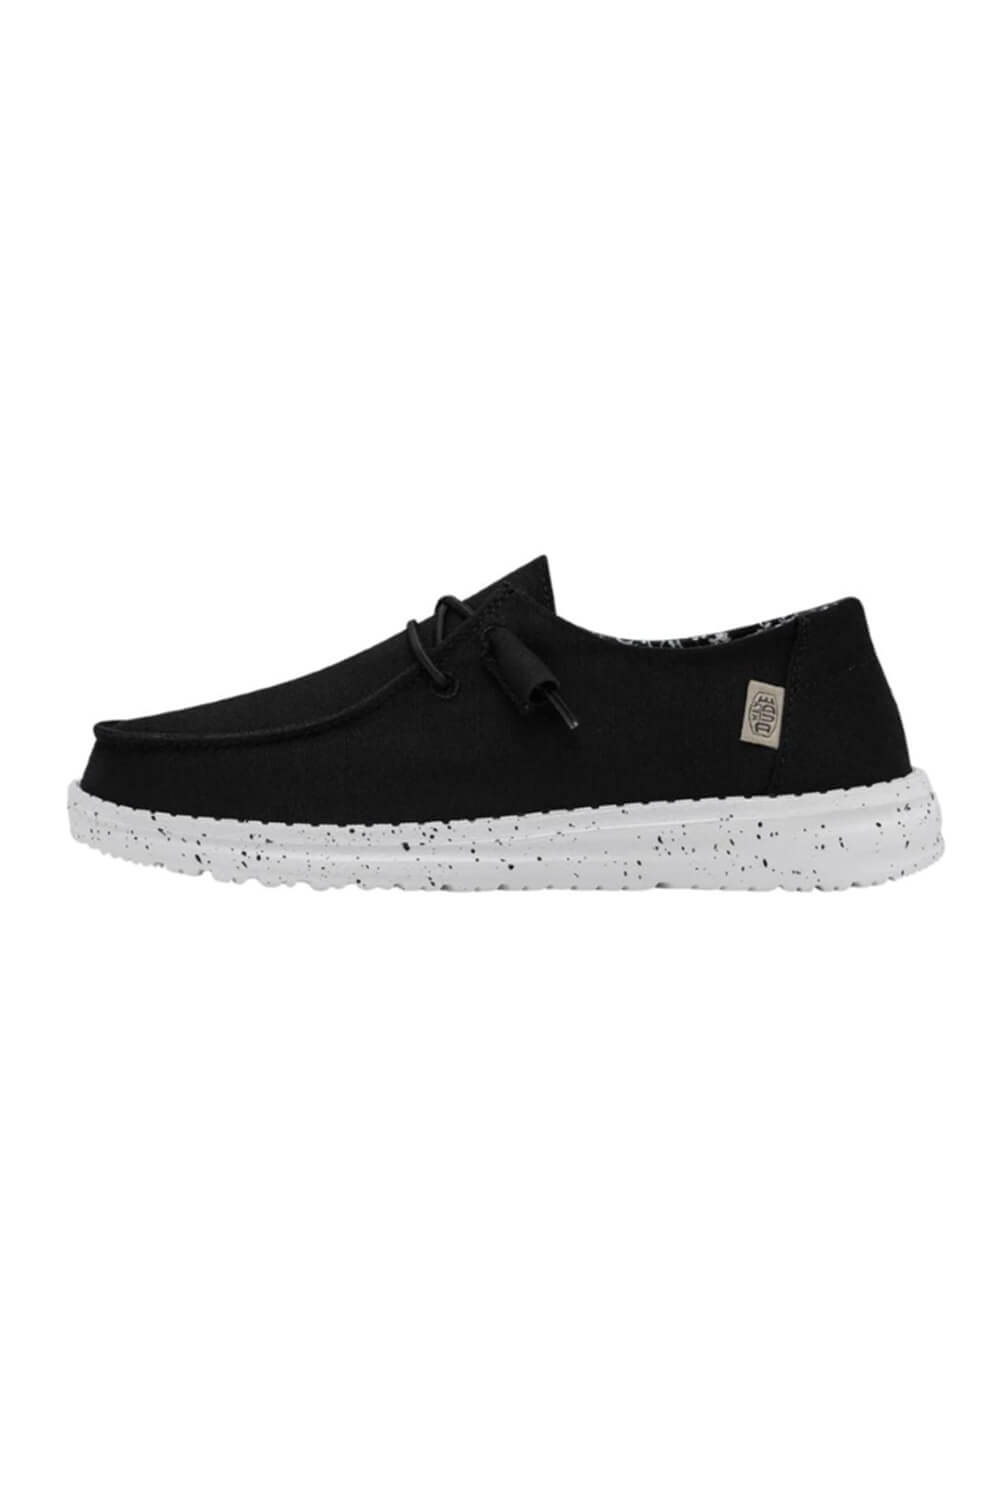 HEYDUDE Women's Wendy Shoes in Black Odyssey (NEW LOGO)